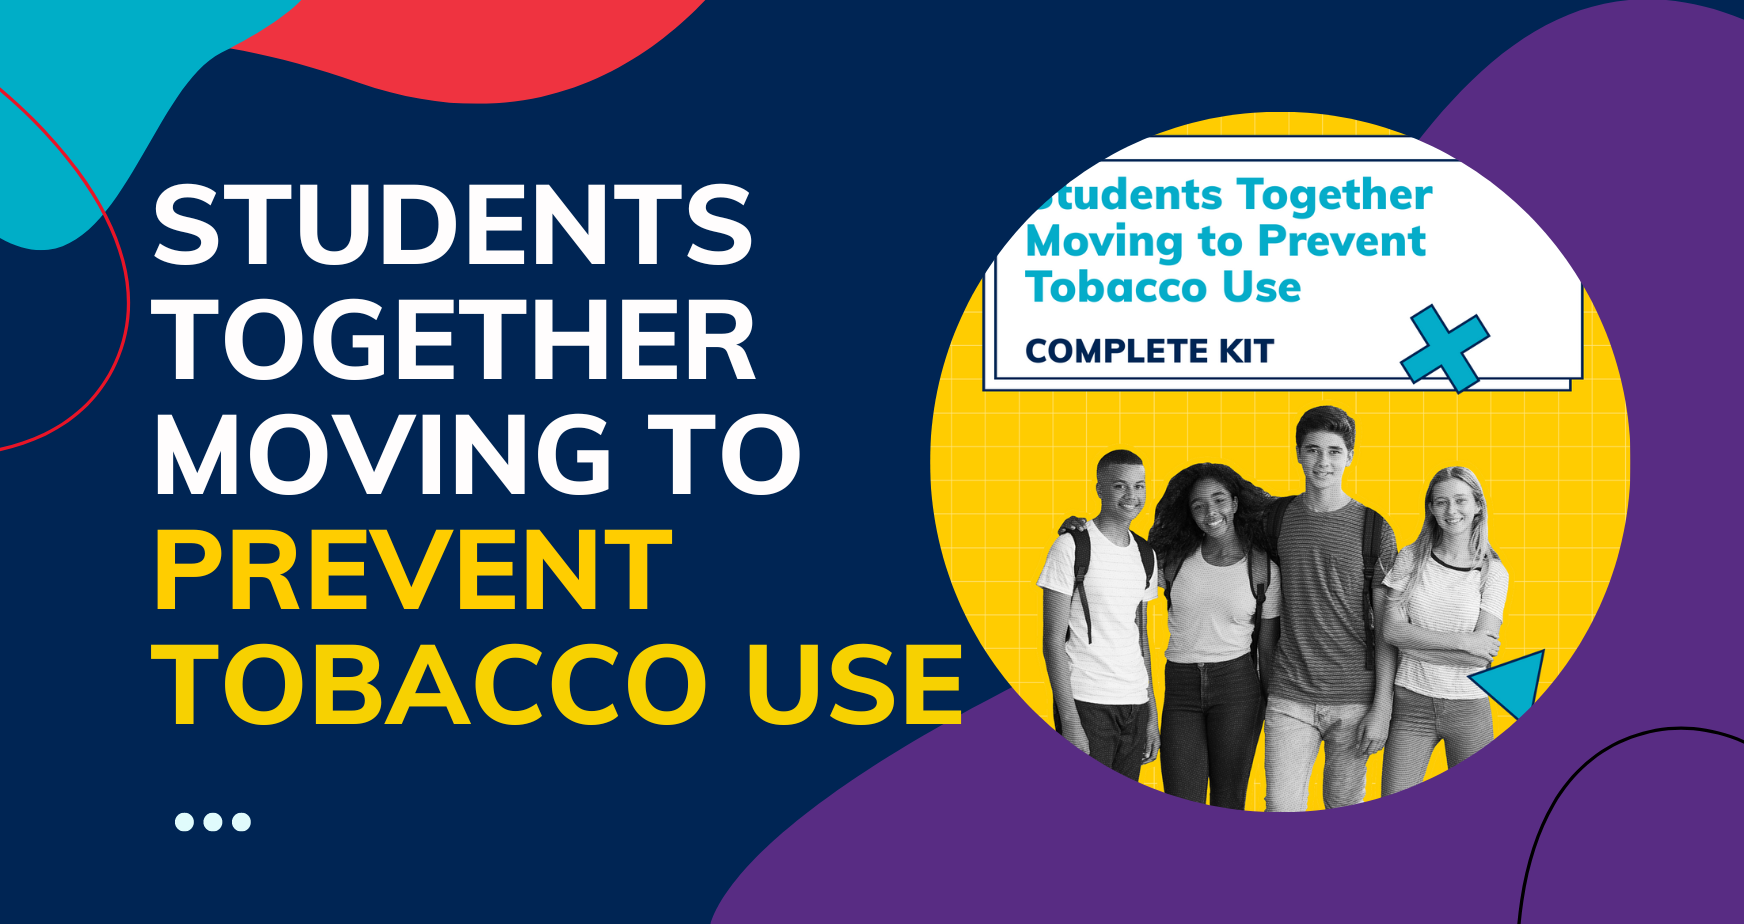 Students Together Moving to Prevent Tobacco Use